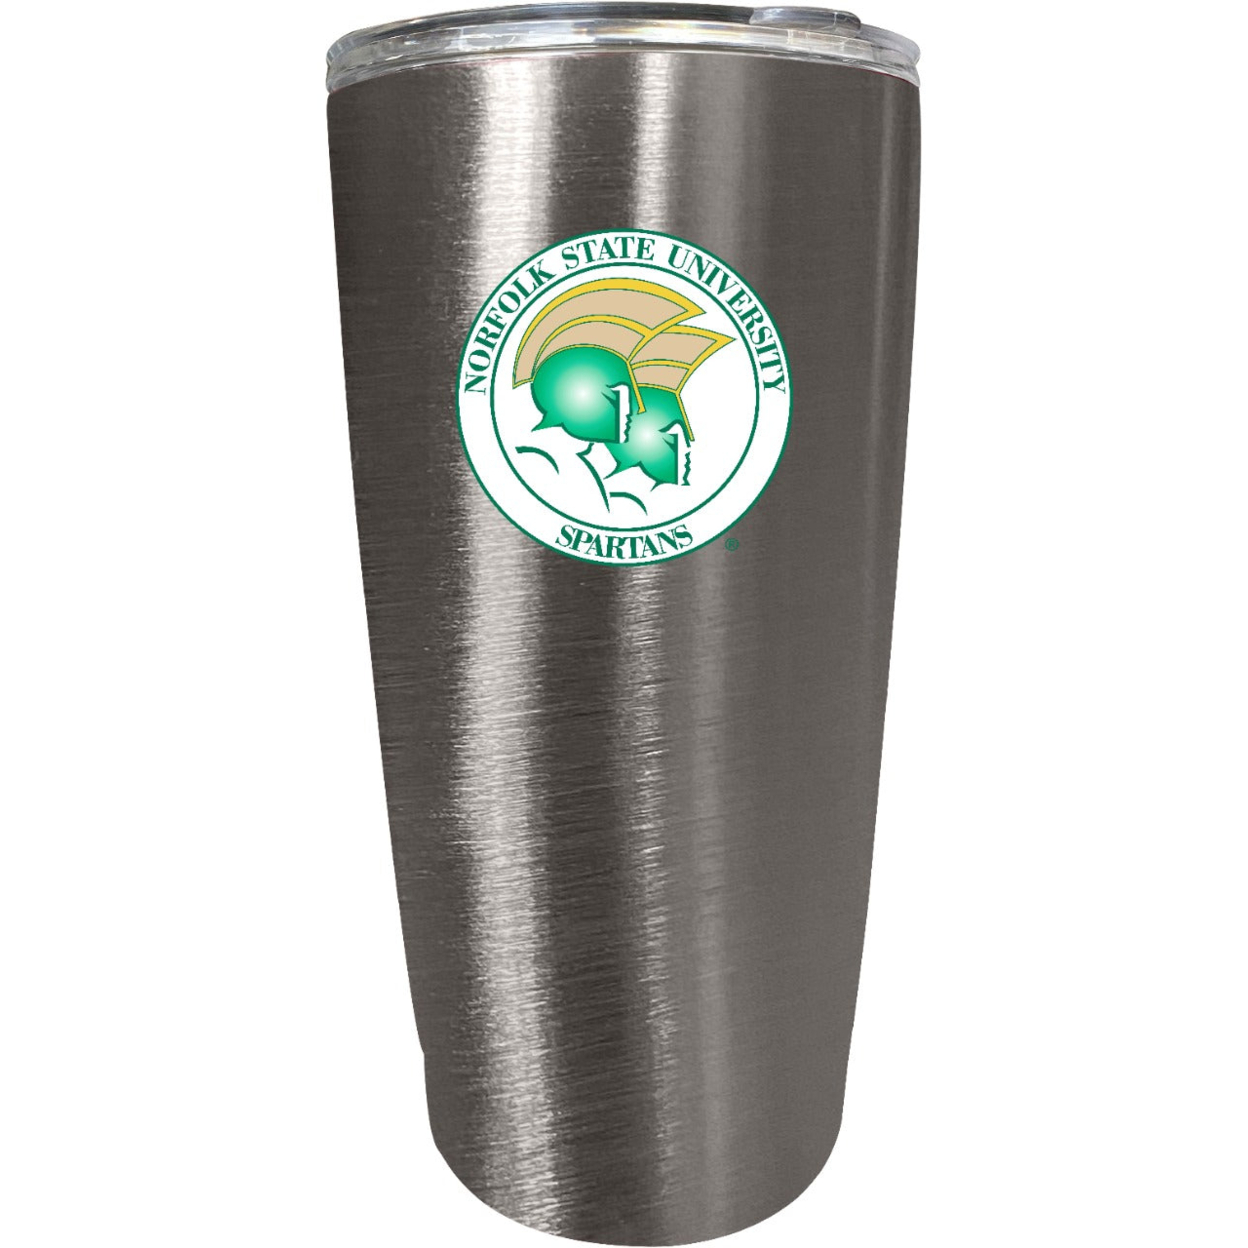 Norfolk State University 16 Oz Insulated Stainless Steel Tumbler Colorless